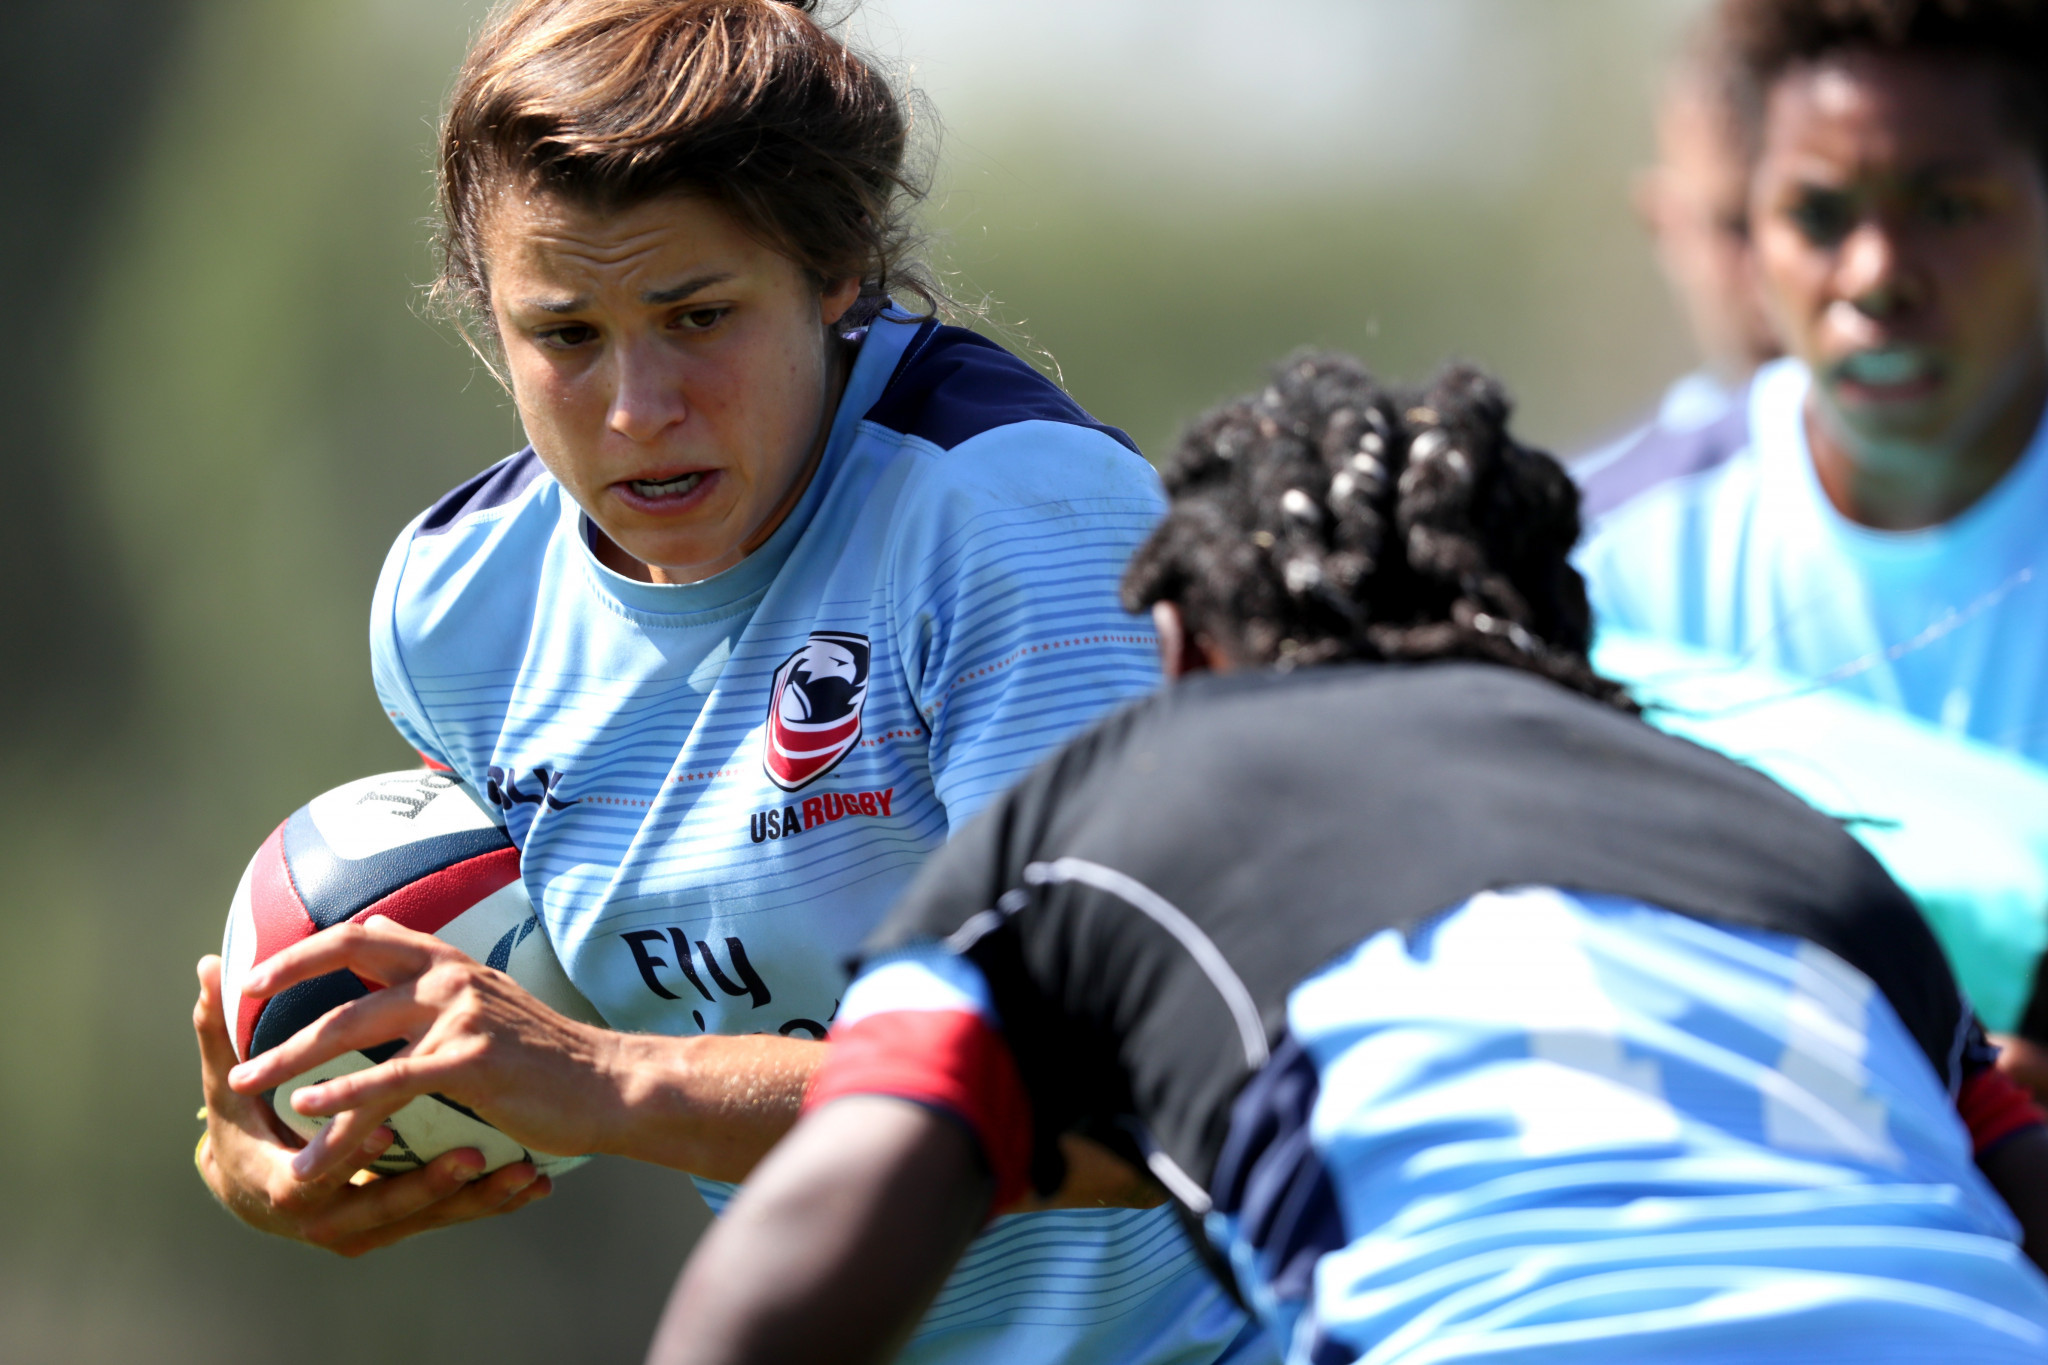 If a new governance structure for USA Rugby was approved, national councils across the youth, collegiate, senior club and international athlete levels would be formed ©Getty Images